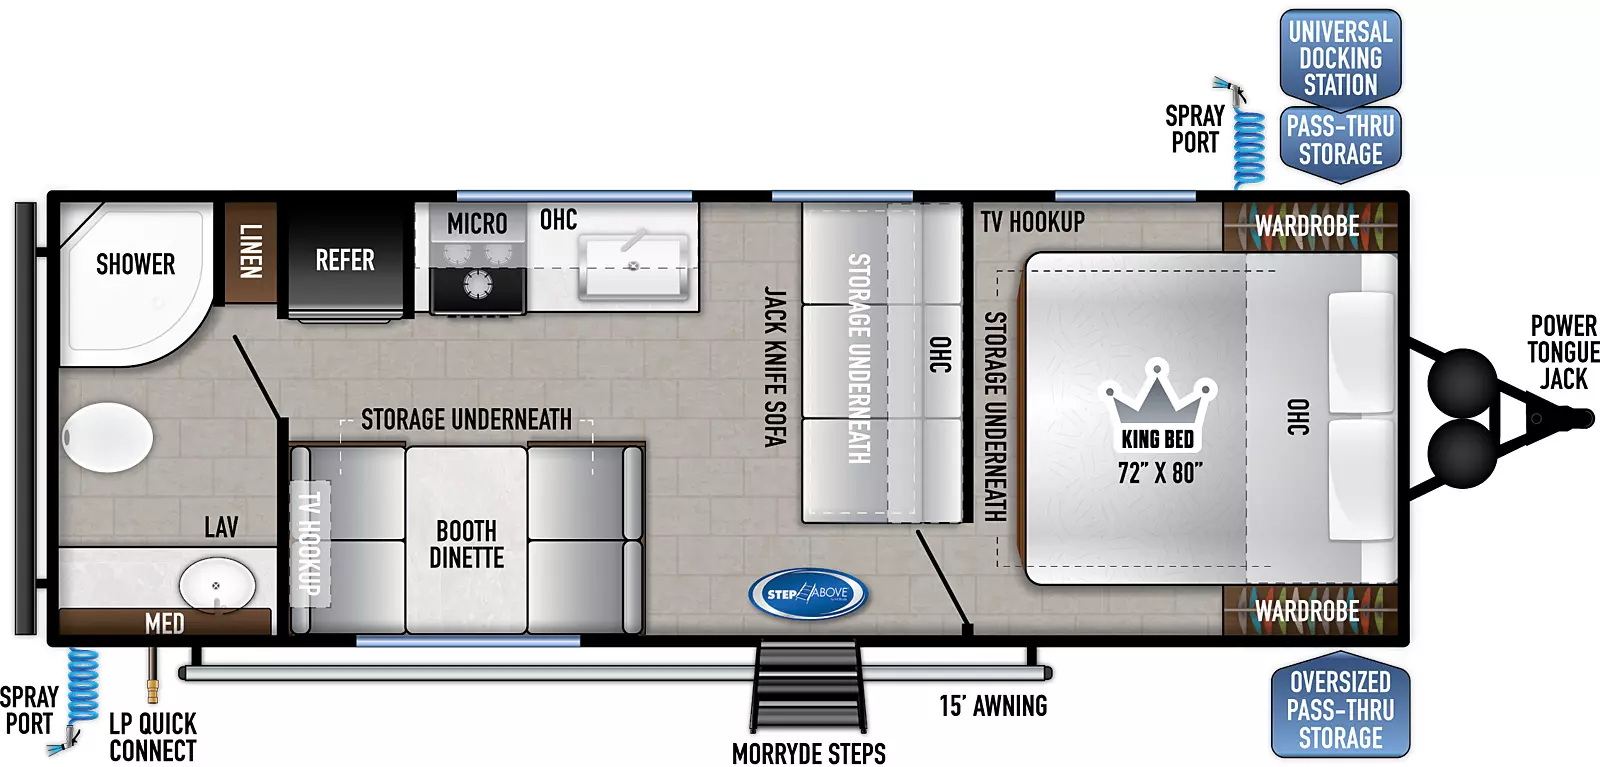 The 25KRB has zero slides and one entry door on the door side. Interior layout from front to back: front bedroom with king bed featuring overhead cabinets bedside wards, TV hookup, underbed storage and solid privacy door; kitchen living dining area with jackknife sofa with storage that butts up against front bedroom, booth dinette with storage underneath featuring picture window on door side, across is a residential sink, kitchen counter with 3-burner cooktop, oven, overhead microwave and cabinets plus refrigerator on off-door side; rear bathroom extending across width of the trailer with linen cabinets, shower, porcelain toilet, counter with sink and overhead medicine cabinet. Exterior from front to back: Power tongue jack, oversized pass-thru storage on door side, universal docking station in pass-thru on off-door side with spray port; solid steps at entry door on door side, LP quick connect in door side rear, spray port and 15' awning. 